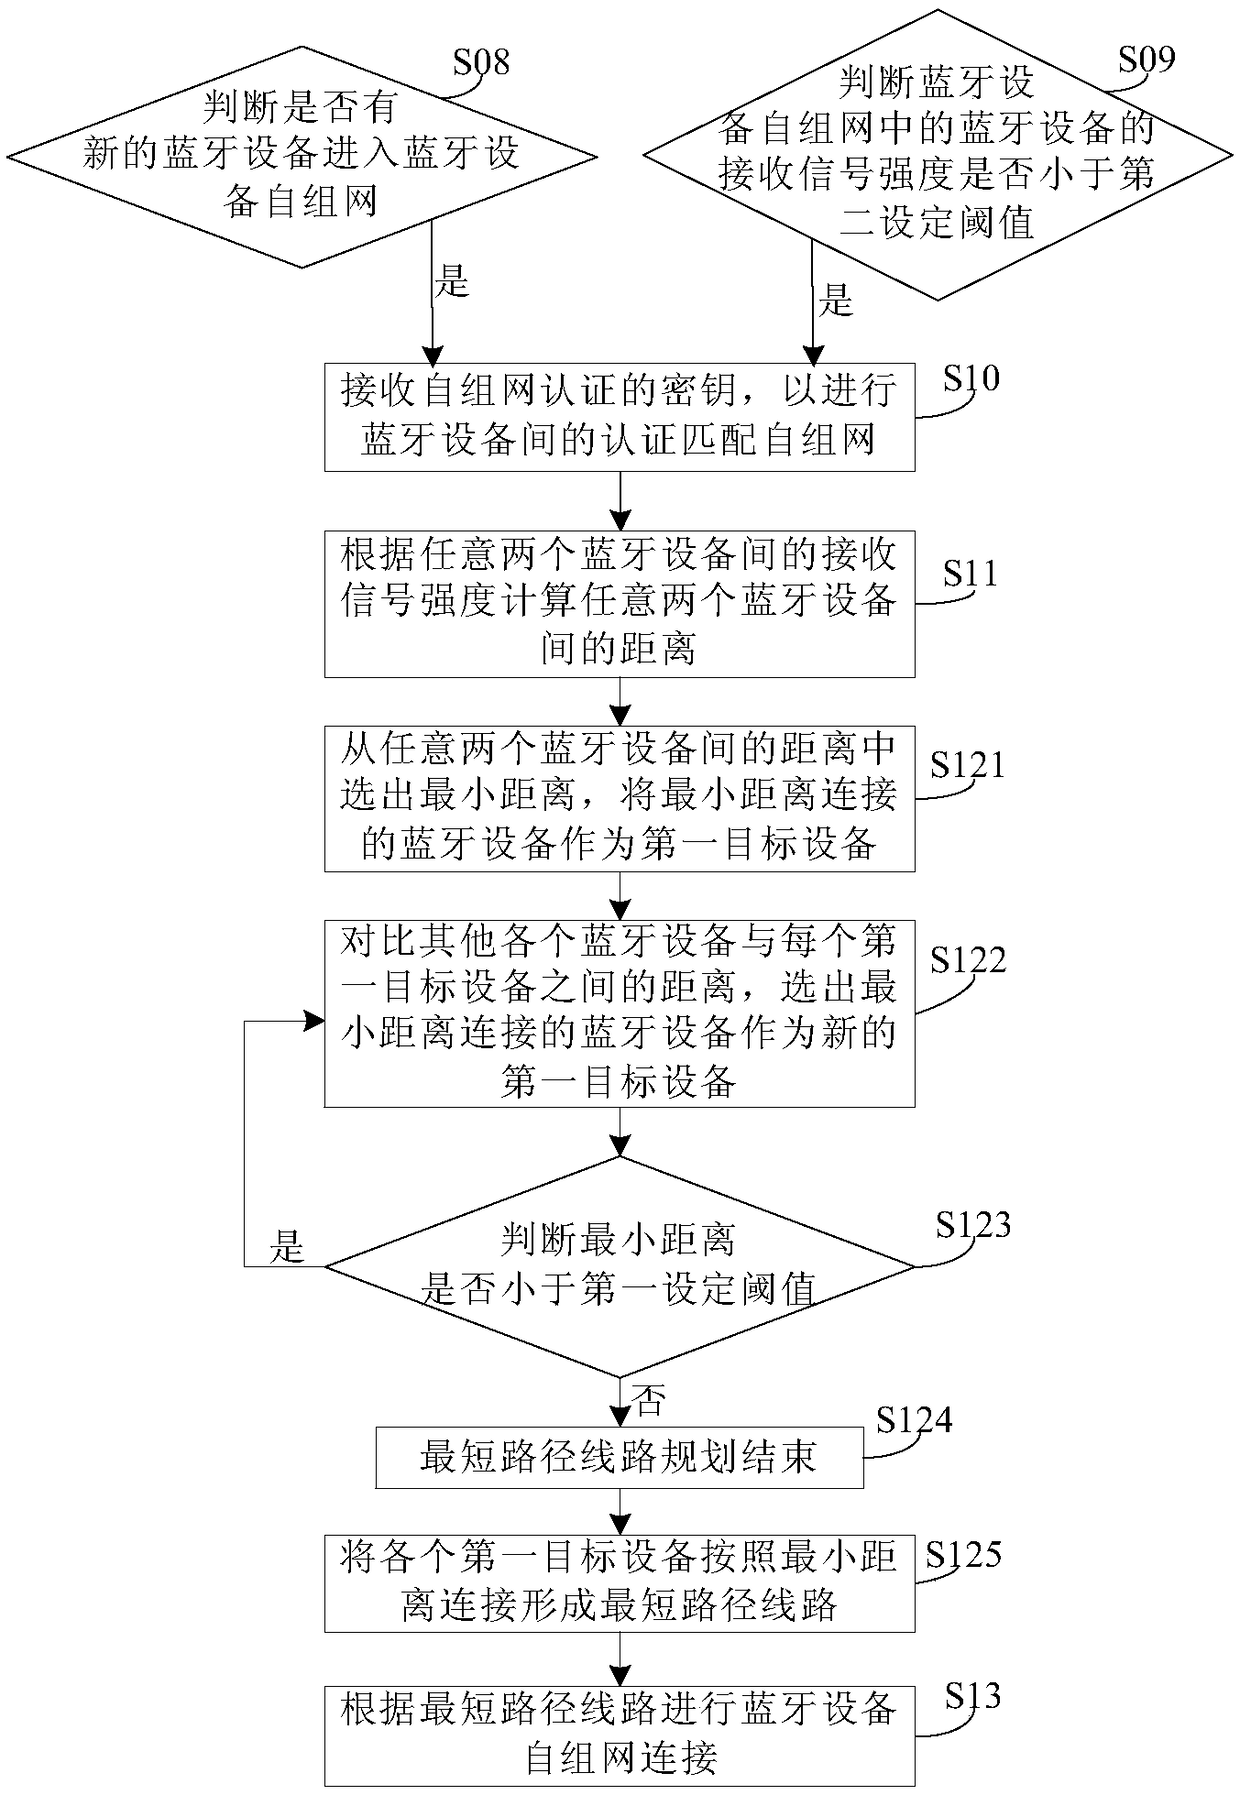 Bluetooth device ad hoc network method and system